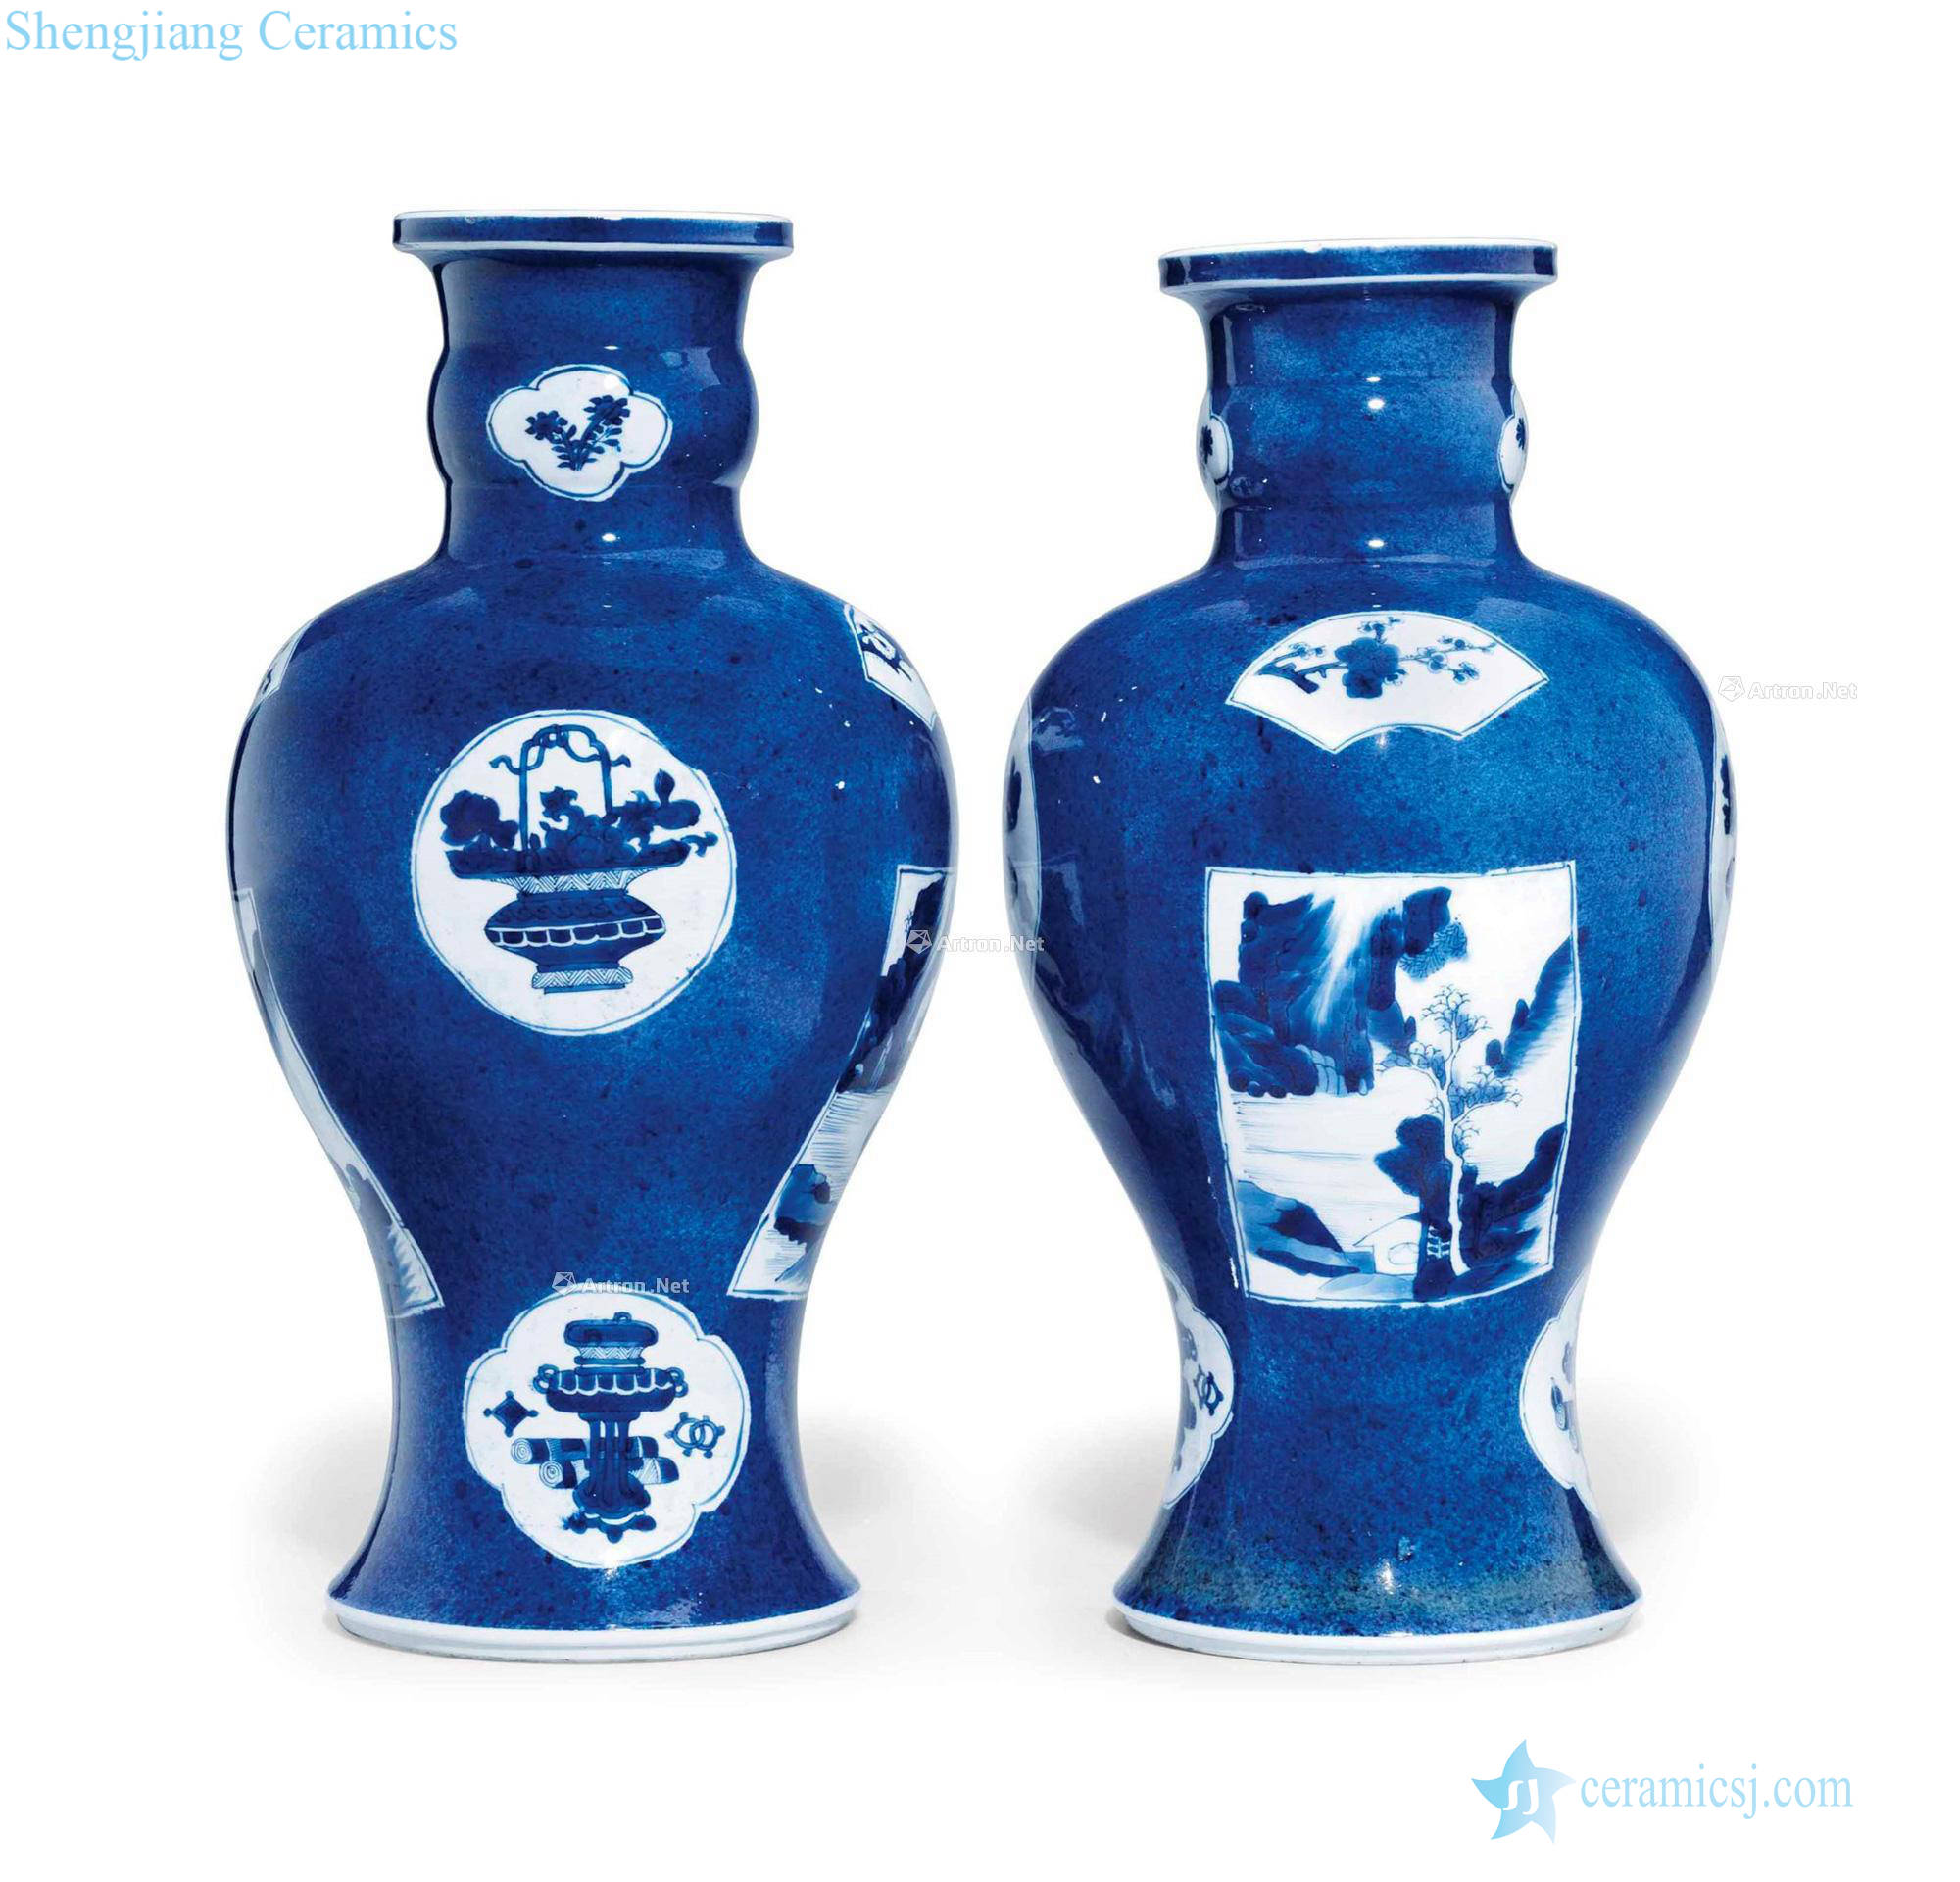 Kangxi period, 1662-1722 - A PAIR OF BLUE - GROUND VASES